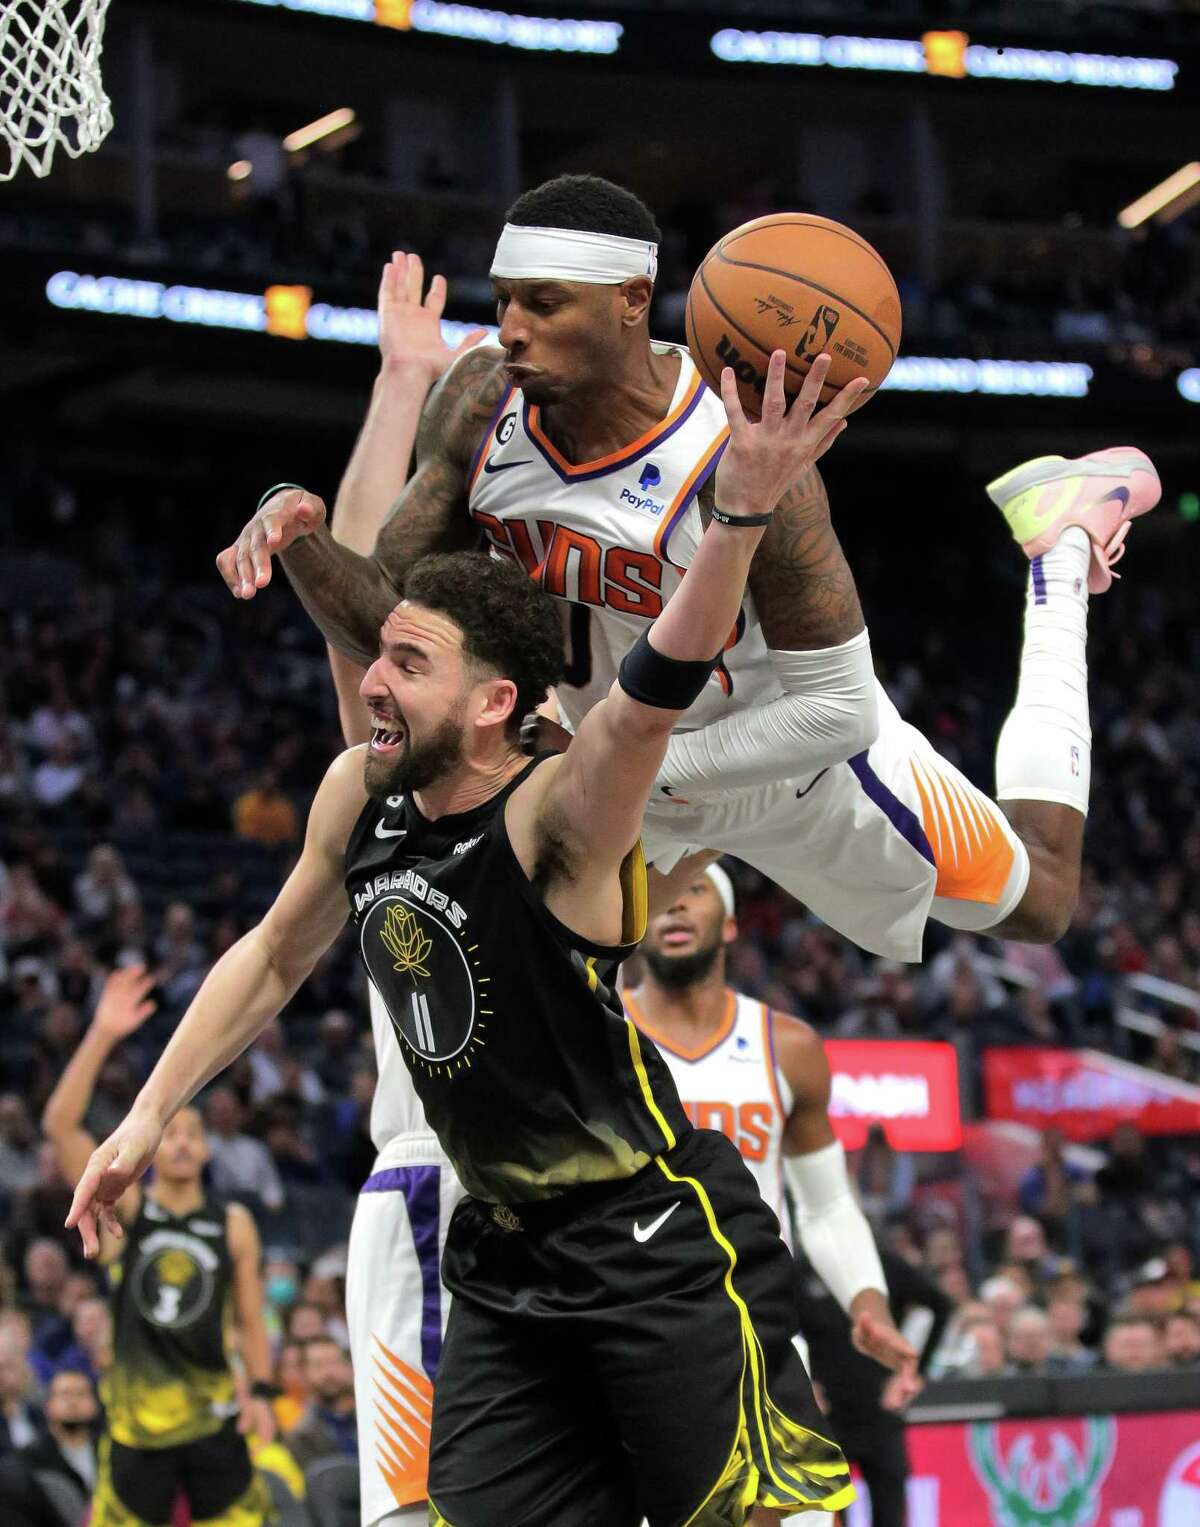 Torrey Craig (0) gets up ended as he fouls Klay Thompson (11) in the second half as the Golden State Warriors played the Phoenix Suns at Chase Center in San Francisco, Calif., on Tuesday, January 10, 2023.